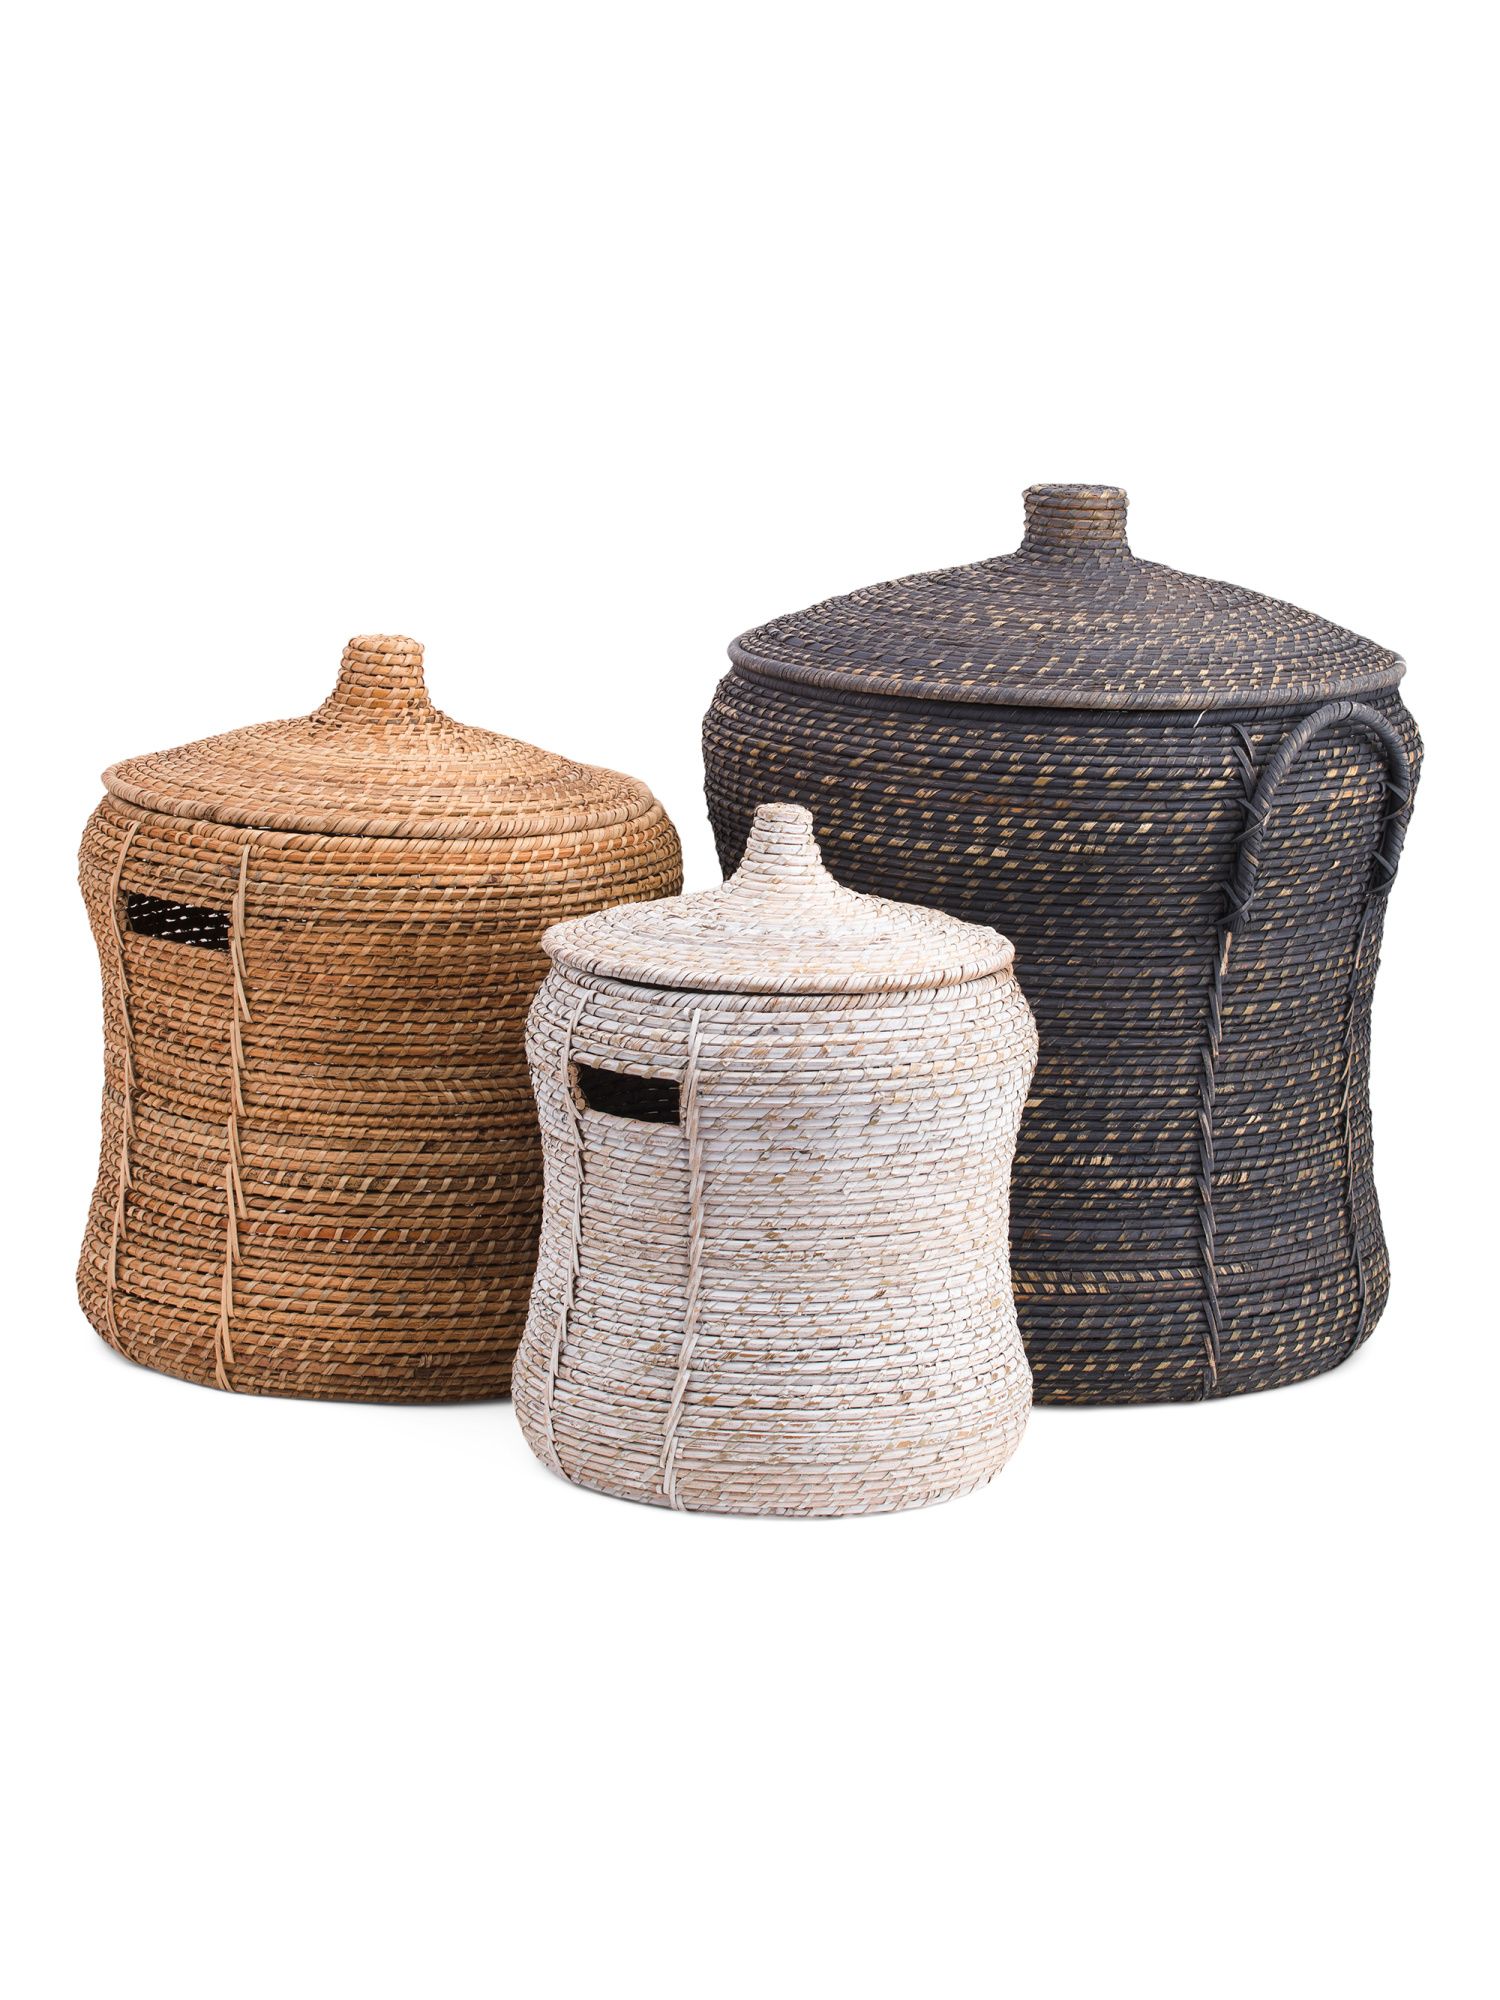 Rattan Storage With Lids Collection | TJ Maxx